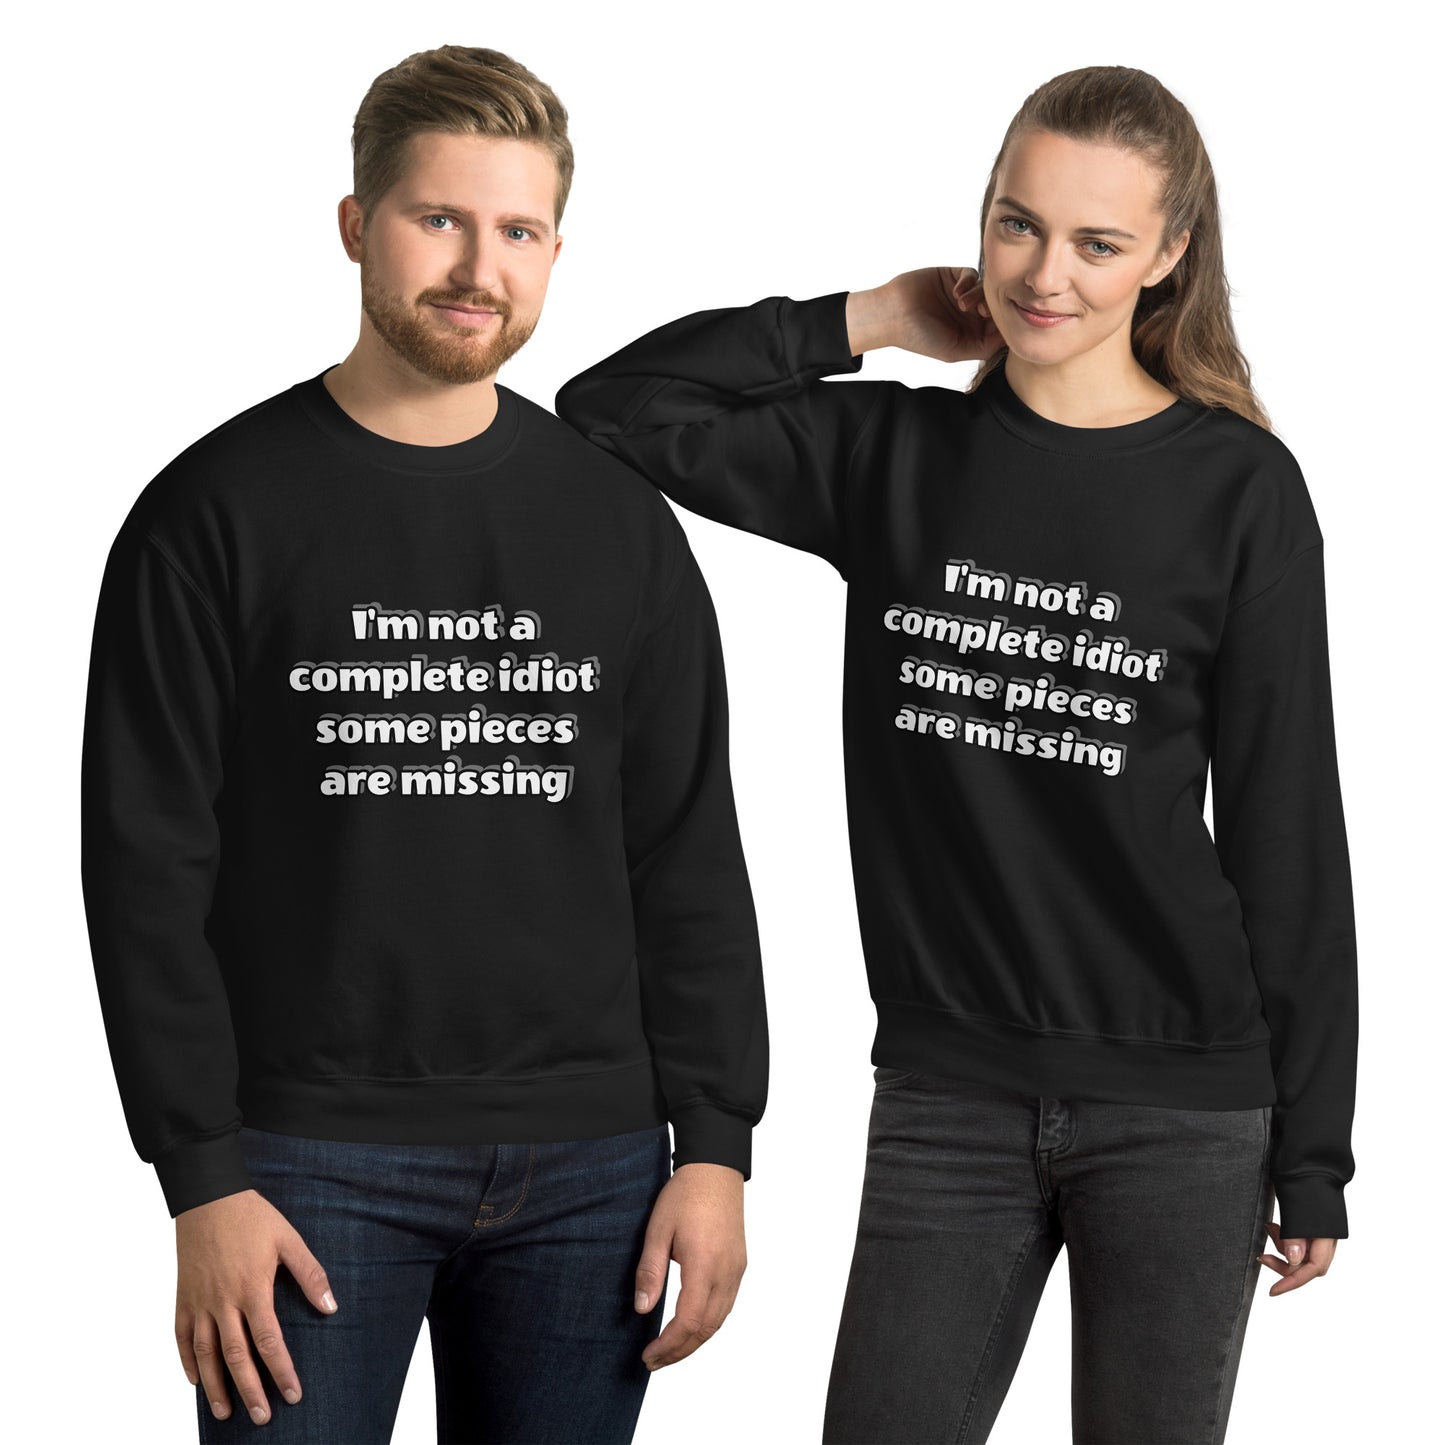 Man and women with black sweatshirt with text “I’m not a complete idiot, some pieces are missing”